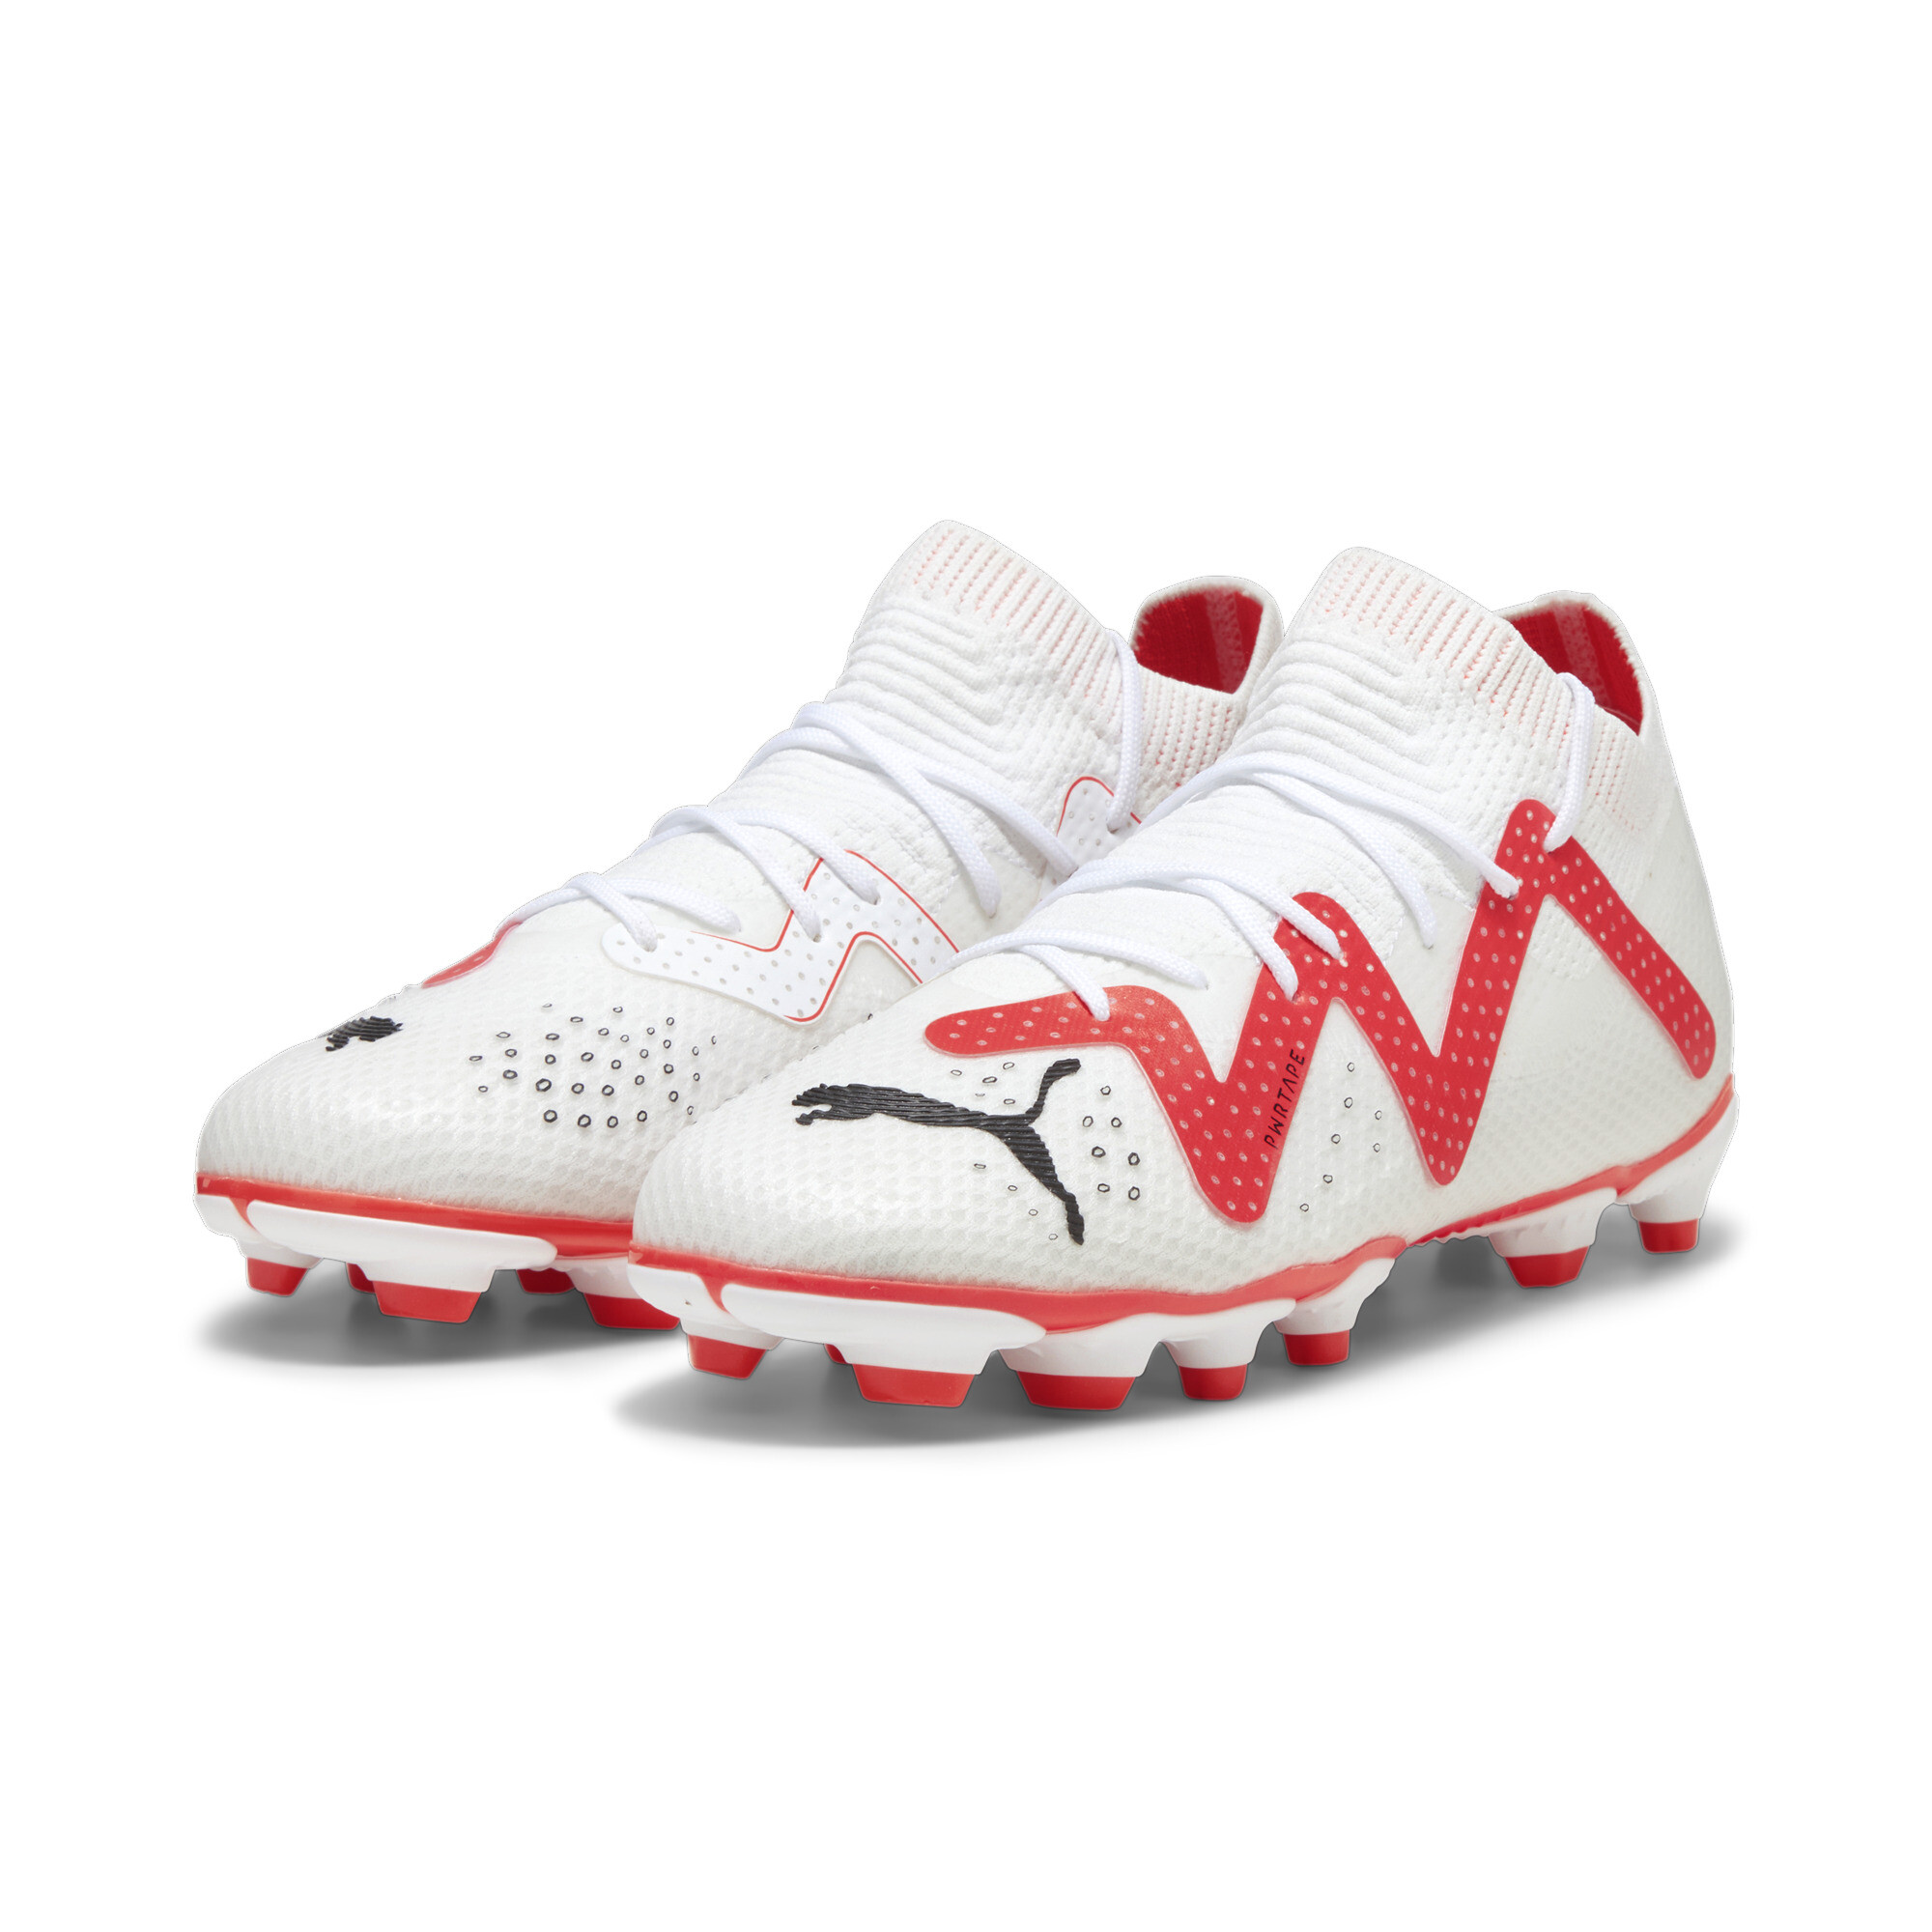 Puma FUTURE PRO FG/AG Youth Football Boots, White, Size 34.5, Shoes